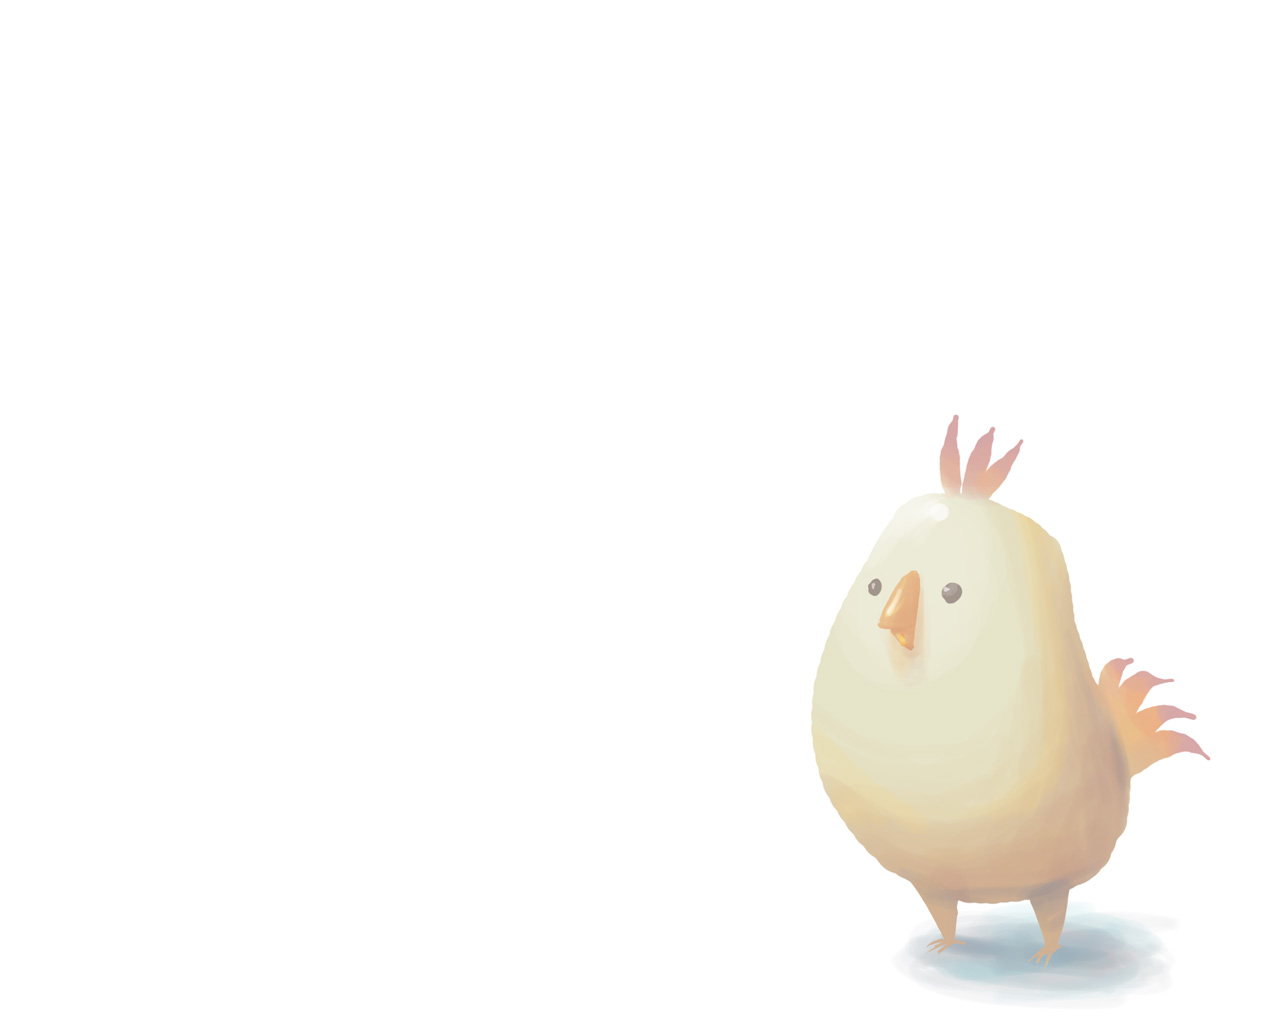 Little Chicky Wallpaper By Kago Woo On Deviantart